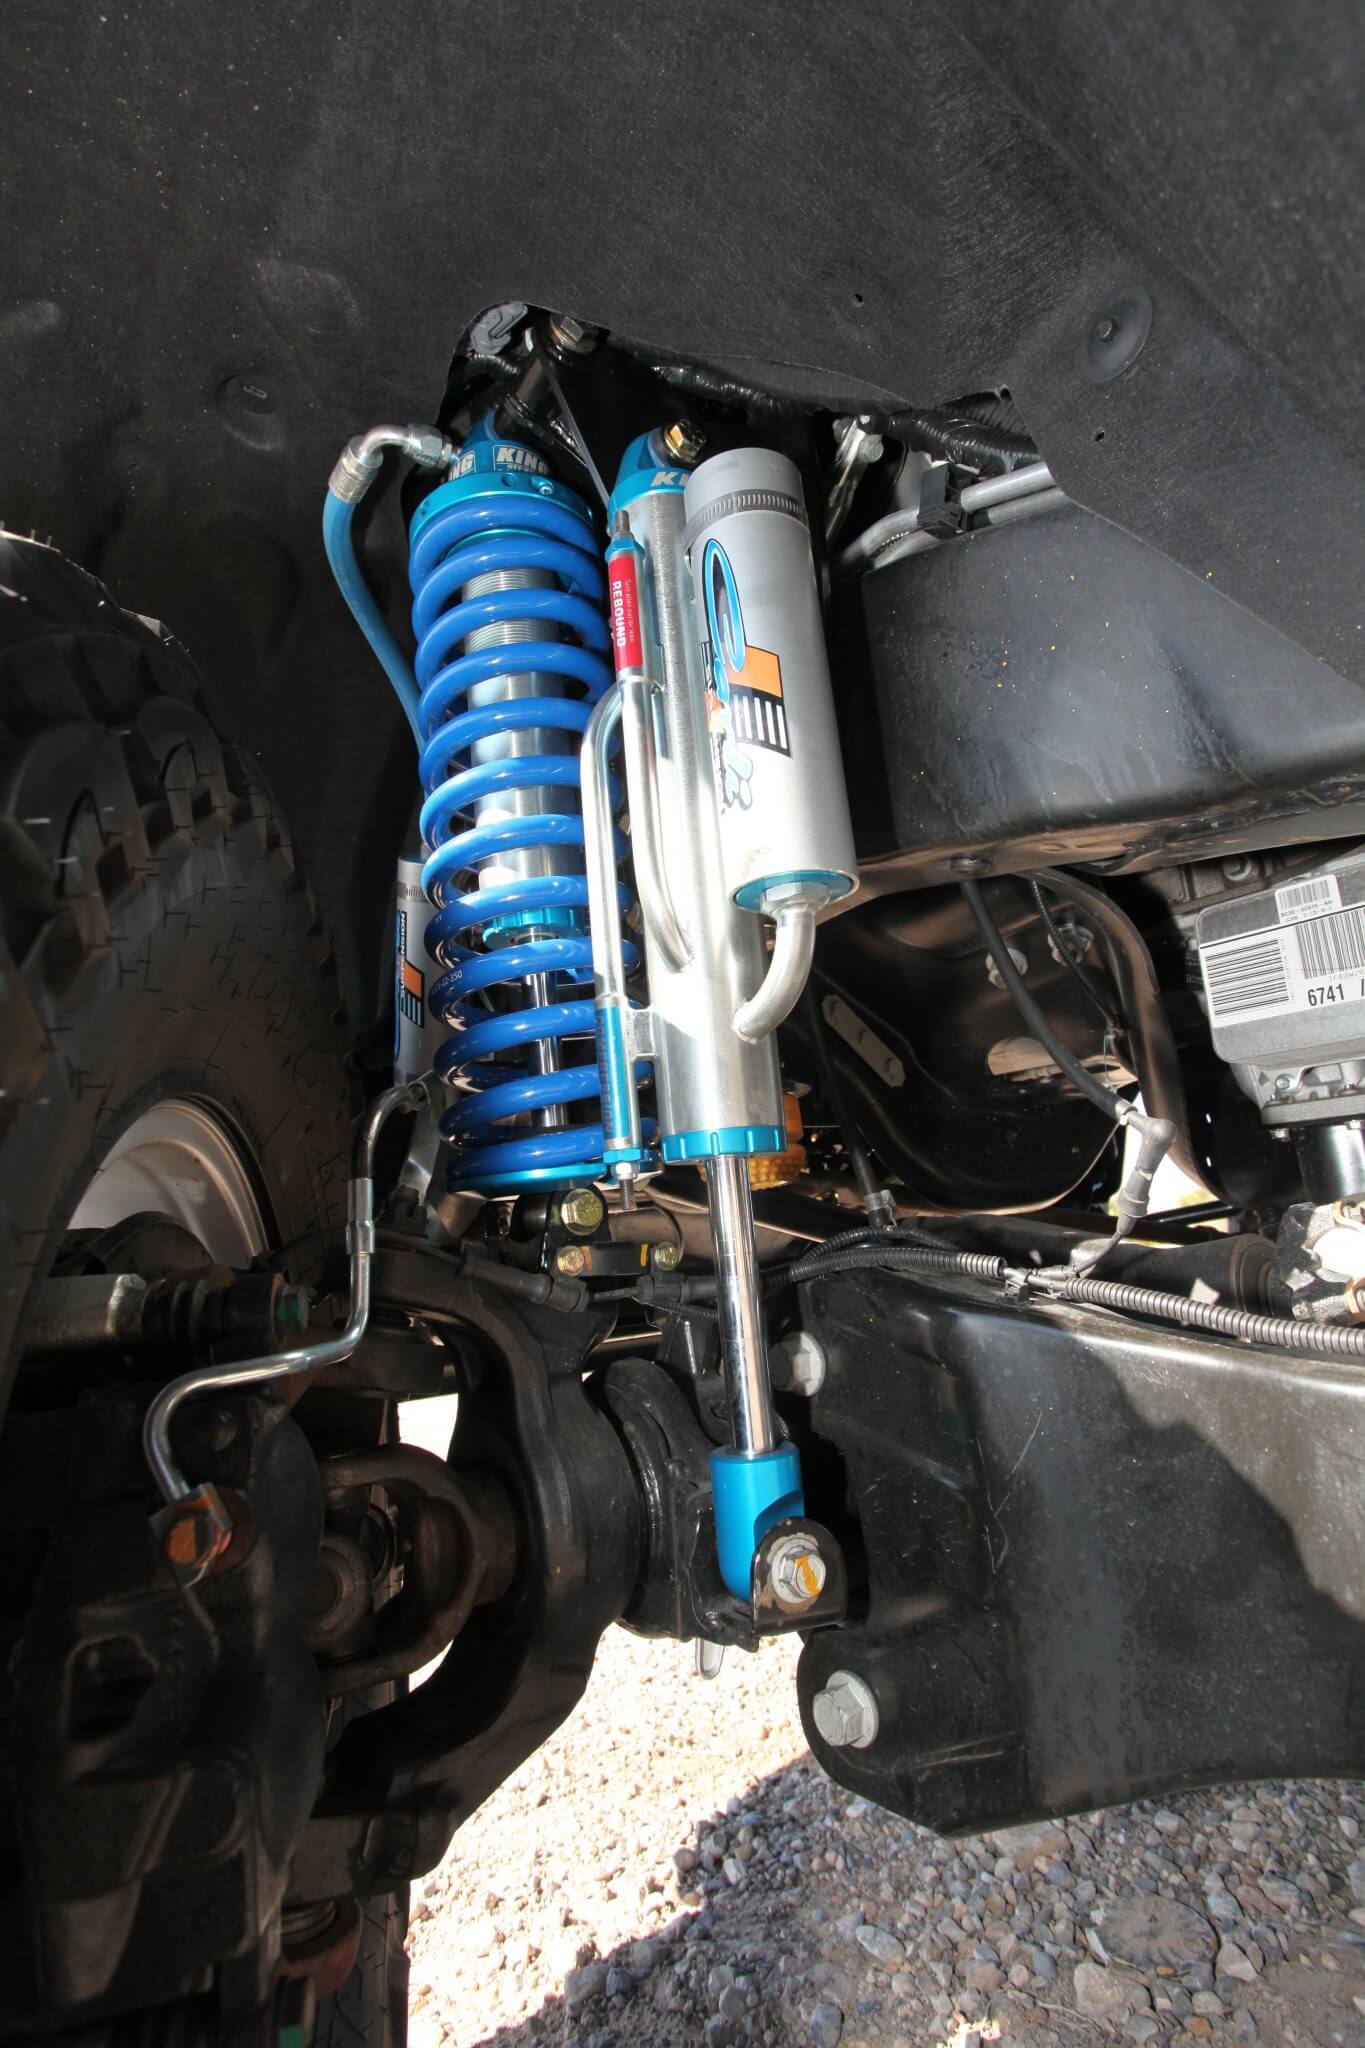 The front suspension was lifted and also firmed up with a pair of King 2.5 coil-over double-bypass gas shocks. Carli Suspension was the source for this tuned setup.